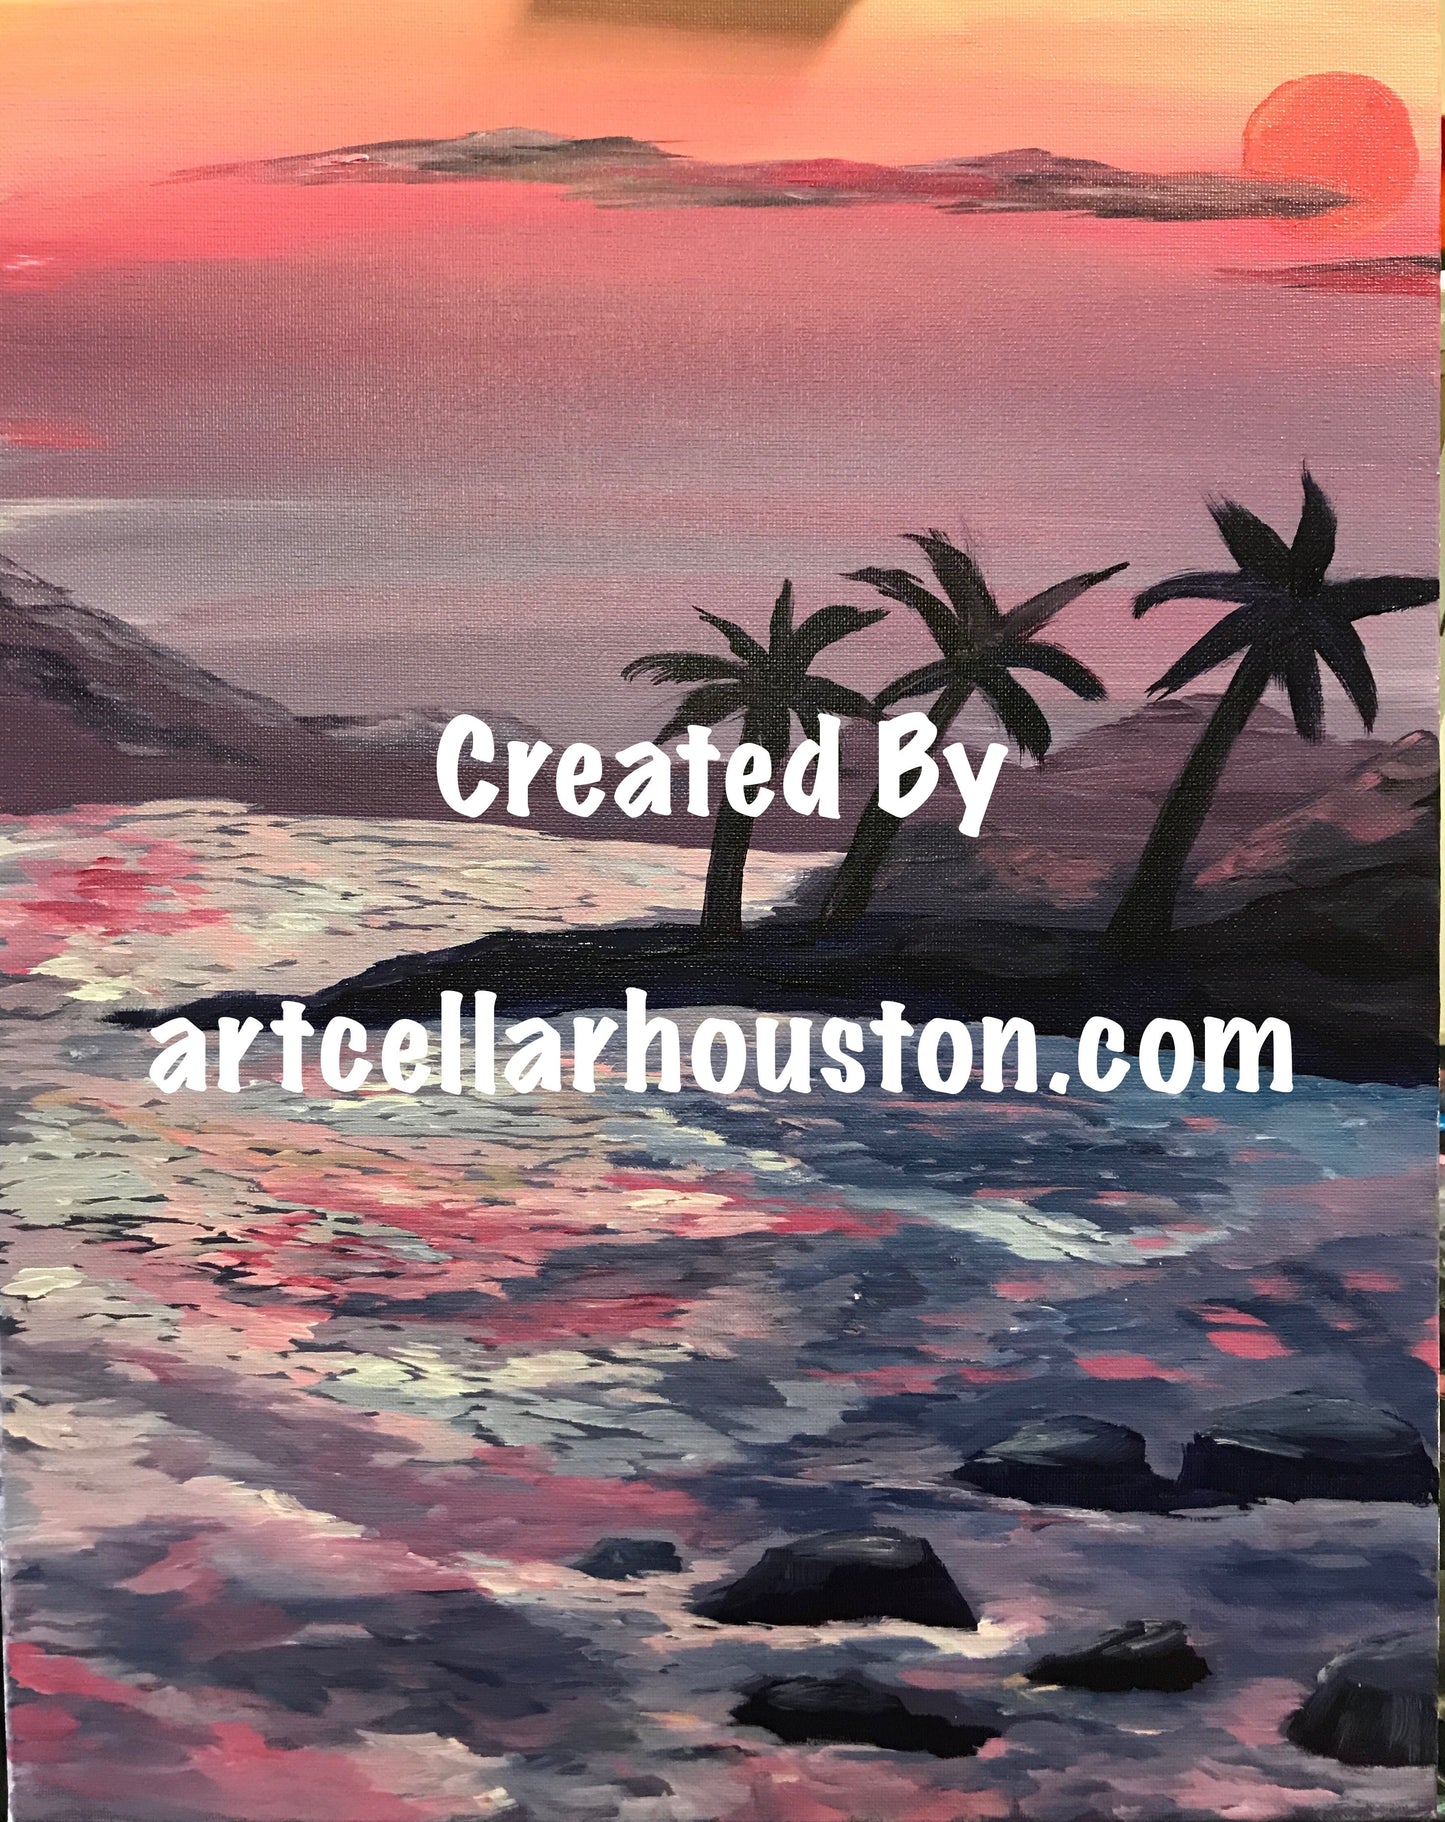 Sat, May 21st, 1-3P “Paradise Cove” Private Houston Kids Painting Party